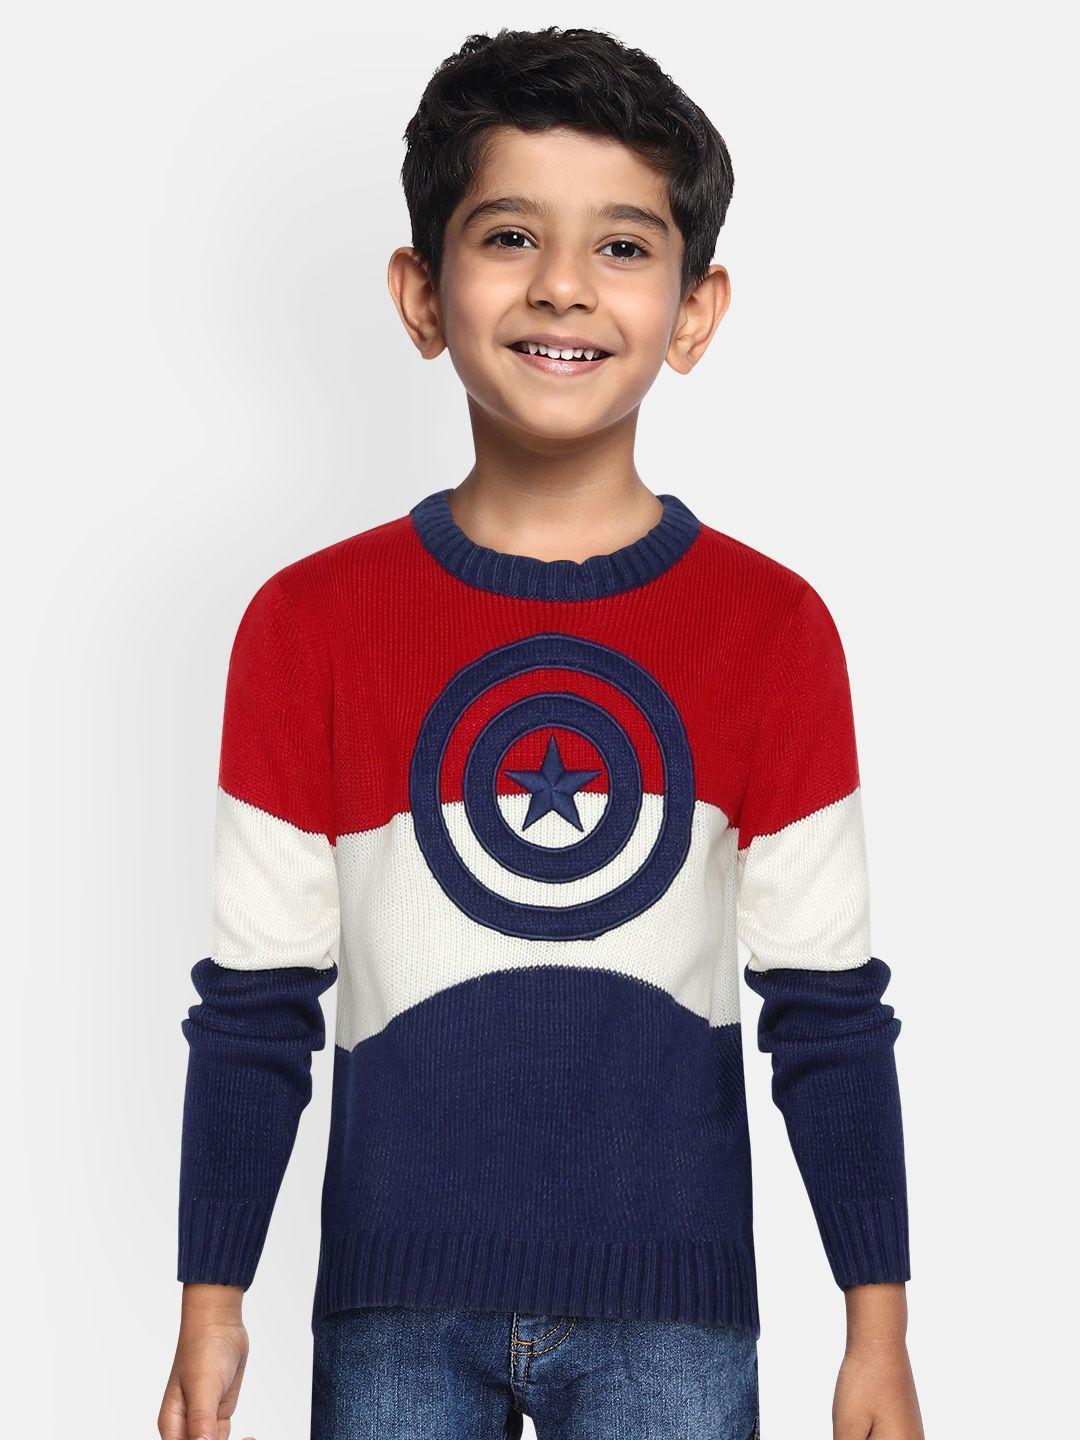 yk-marvel-boys-red-captain-america-shield-embroidered-pullover-sweater